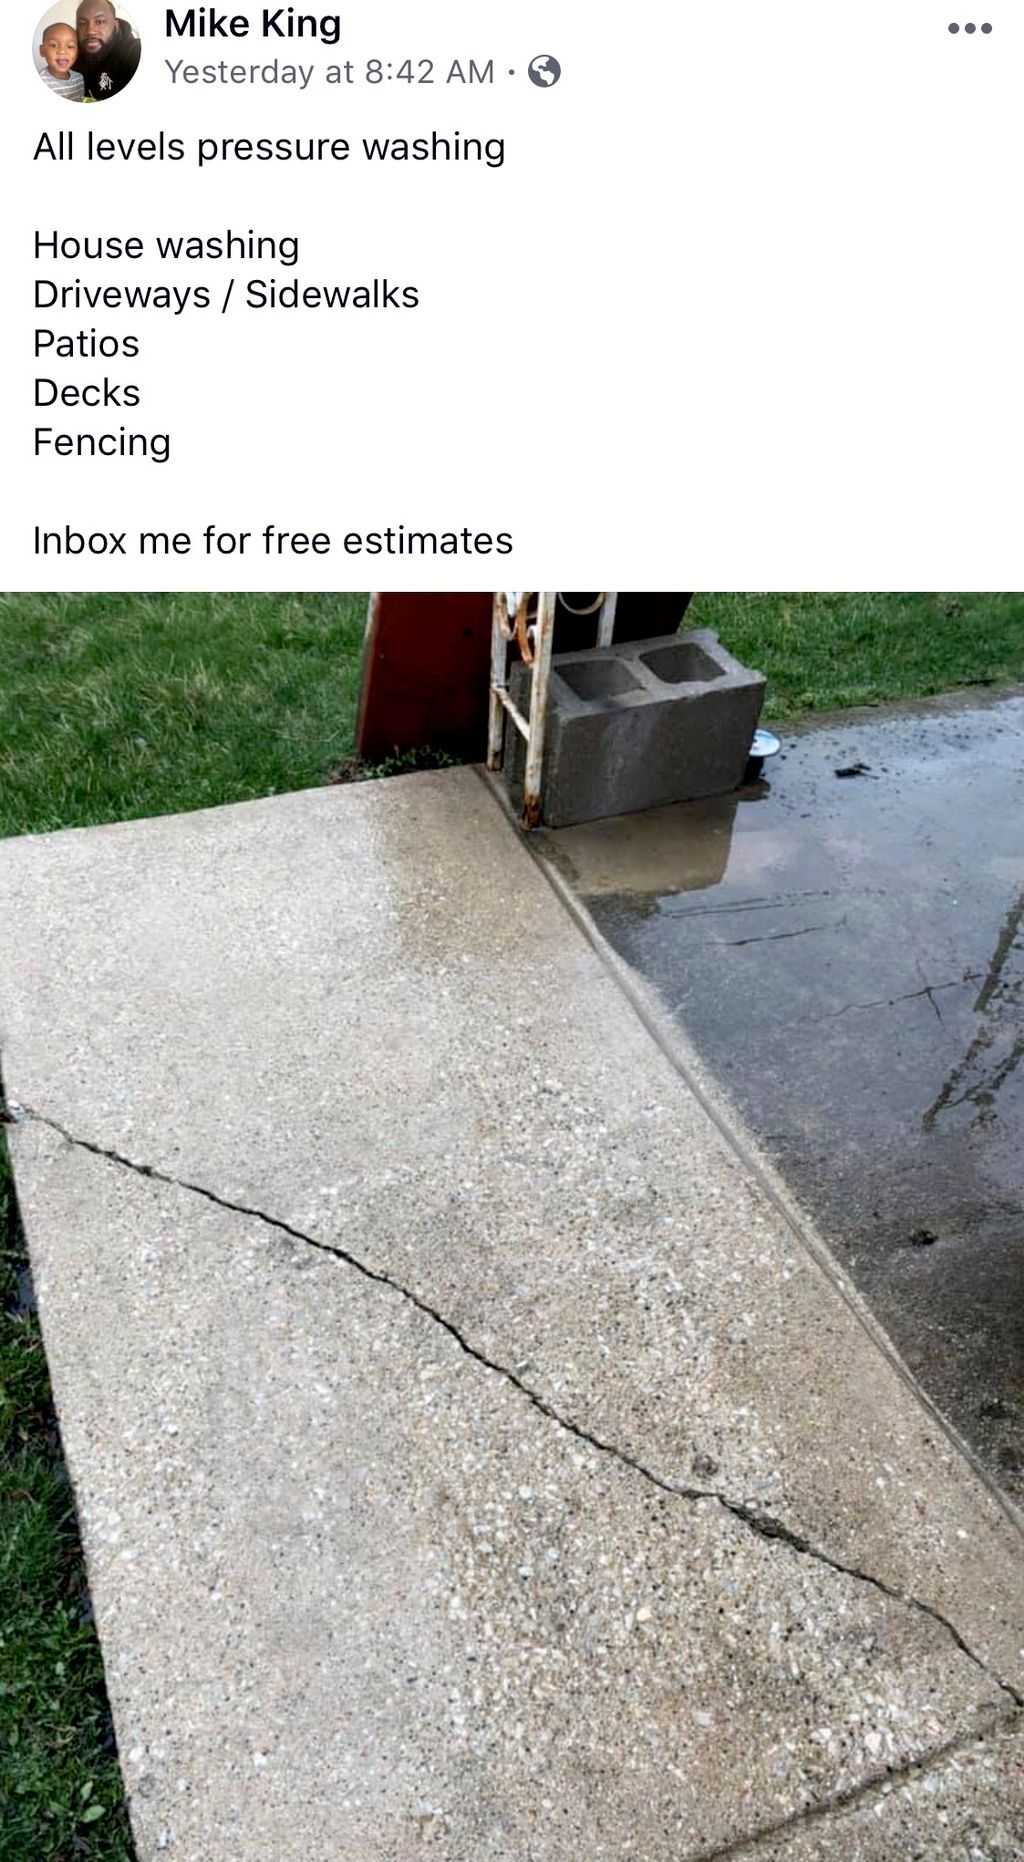 All levels pressure washing/ junk removal